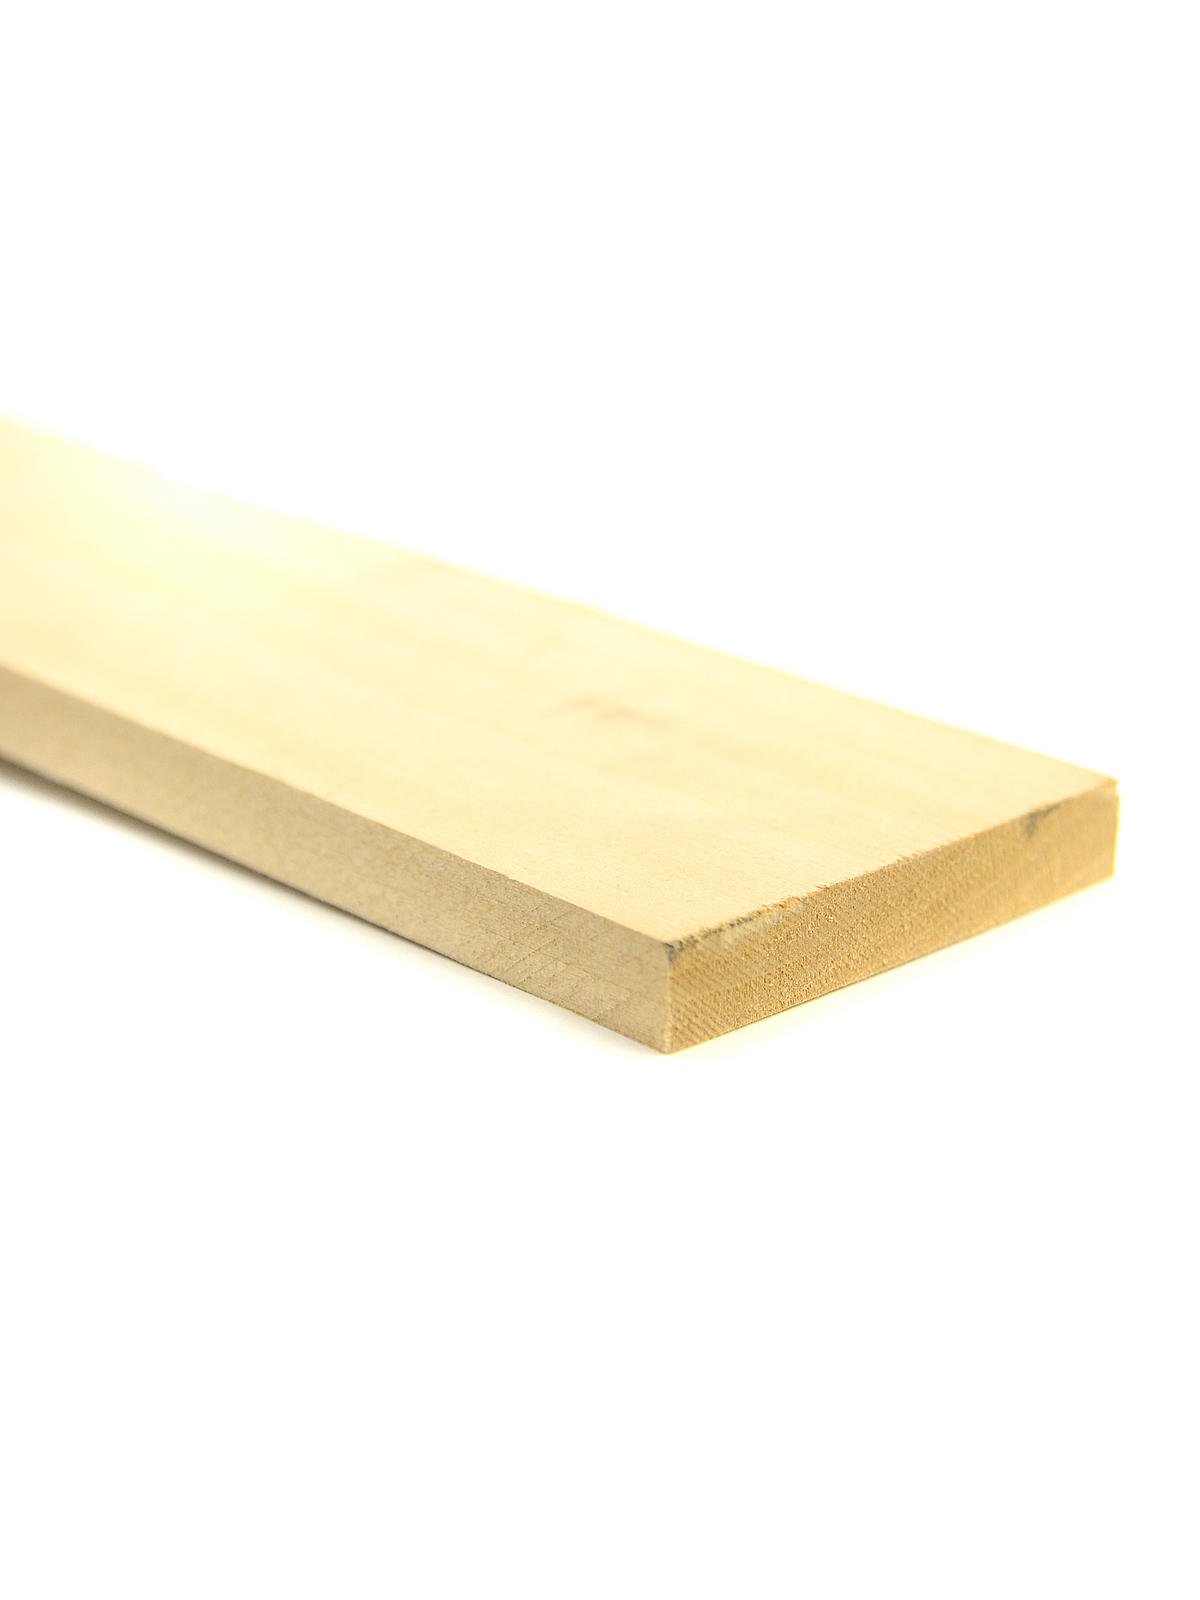 Midwest Products 1/16 In. x 3 In. x 3 Ft. Basswood Board